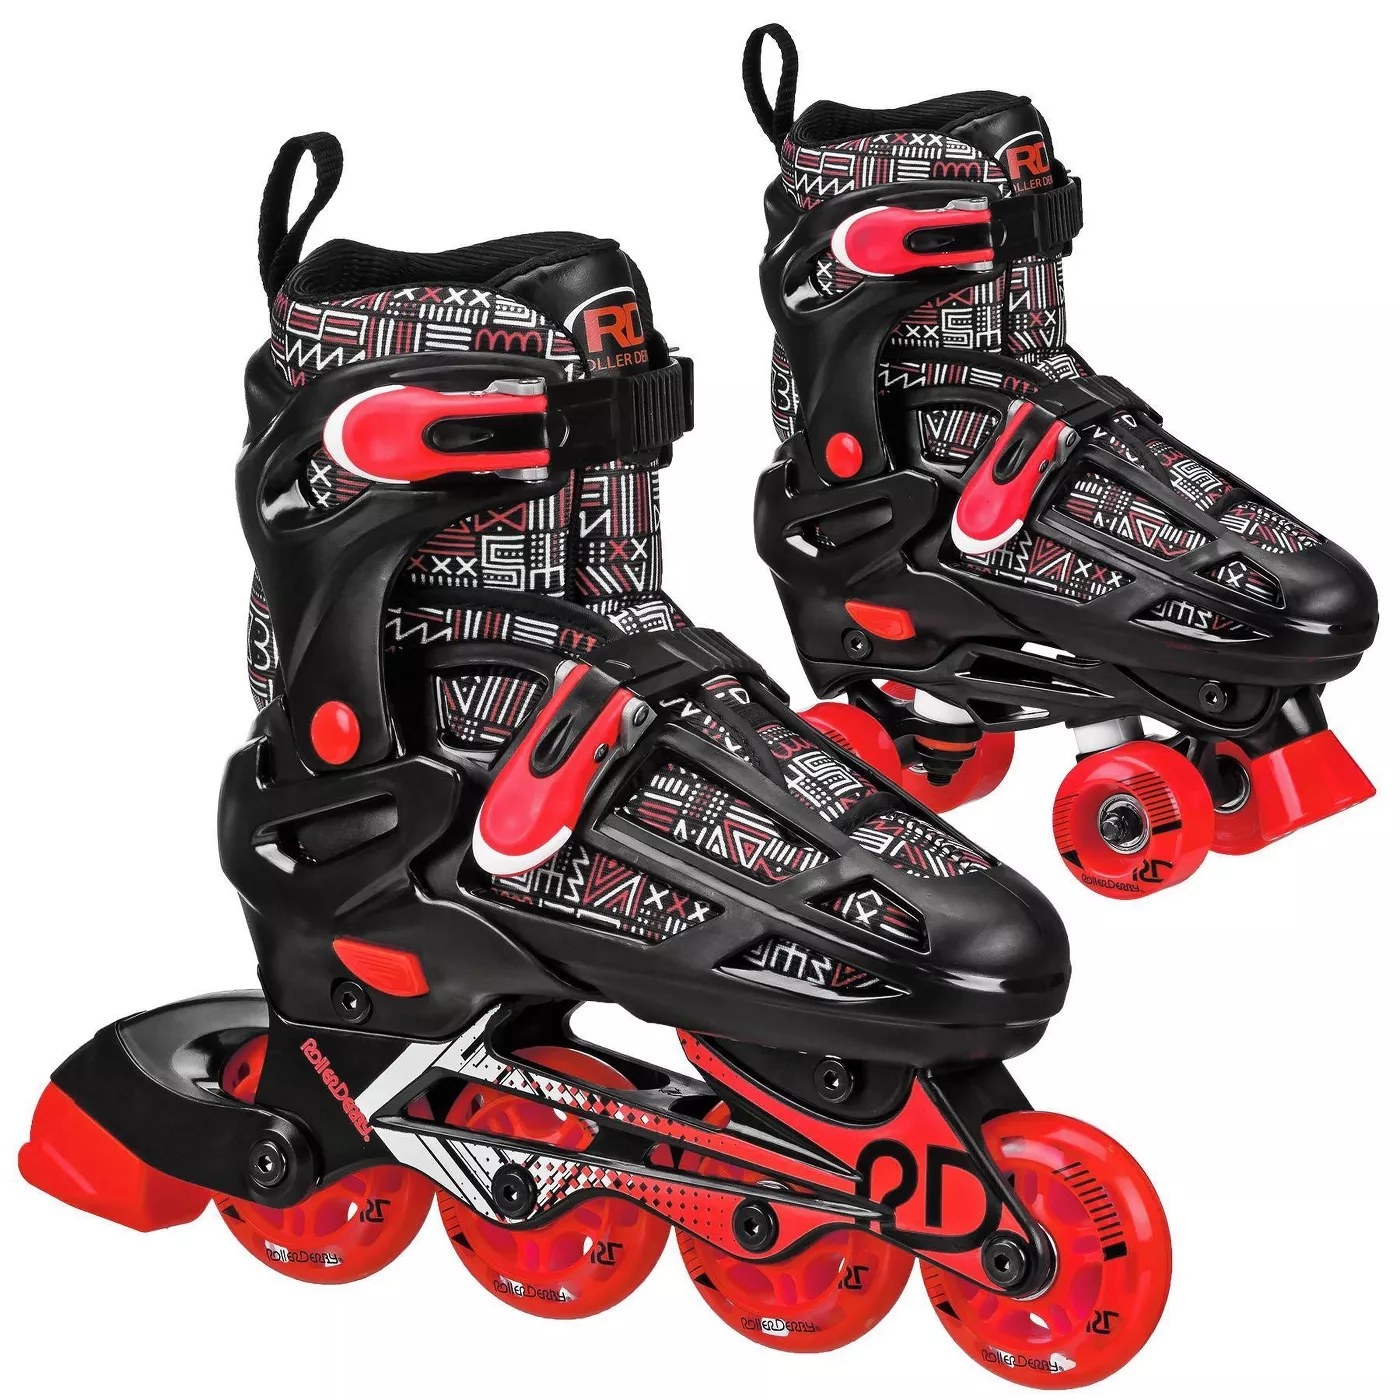 The black and red skates with the in-line and quad wheel attachments